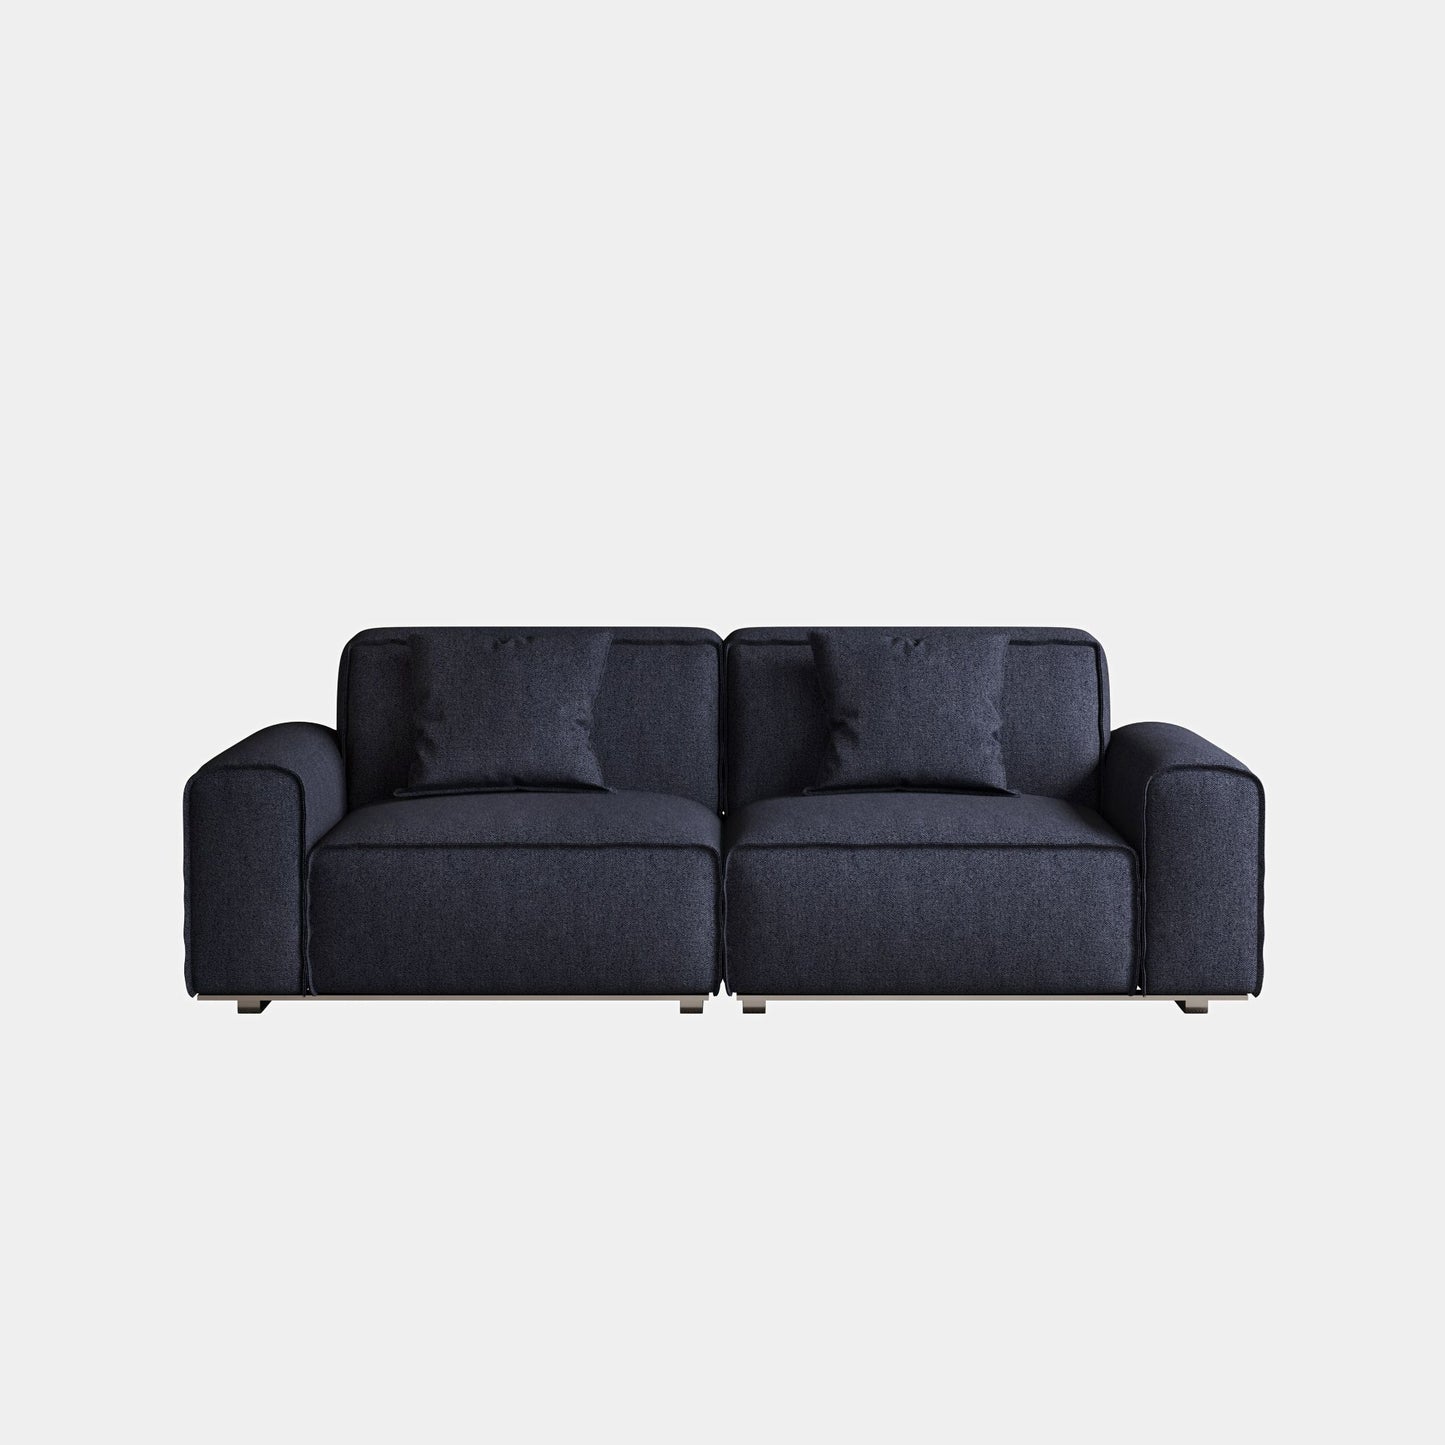 Colby dark blue polyester blend 2 seat fabric sofa